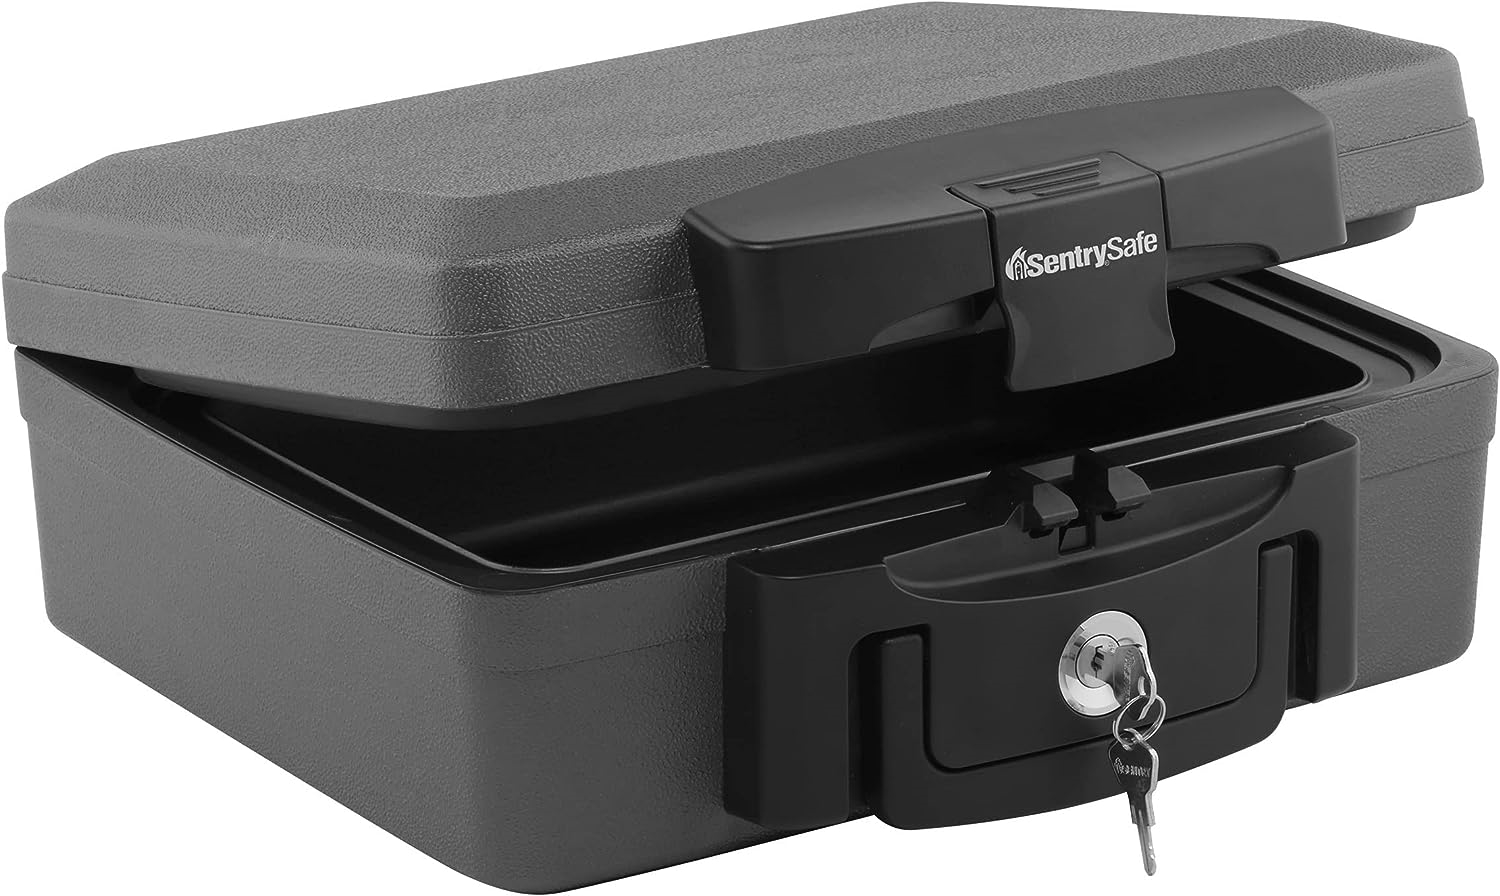 Sentry Safe Fireproof and Waterproof Safe Box | DeviceDaily.com